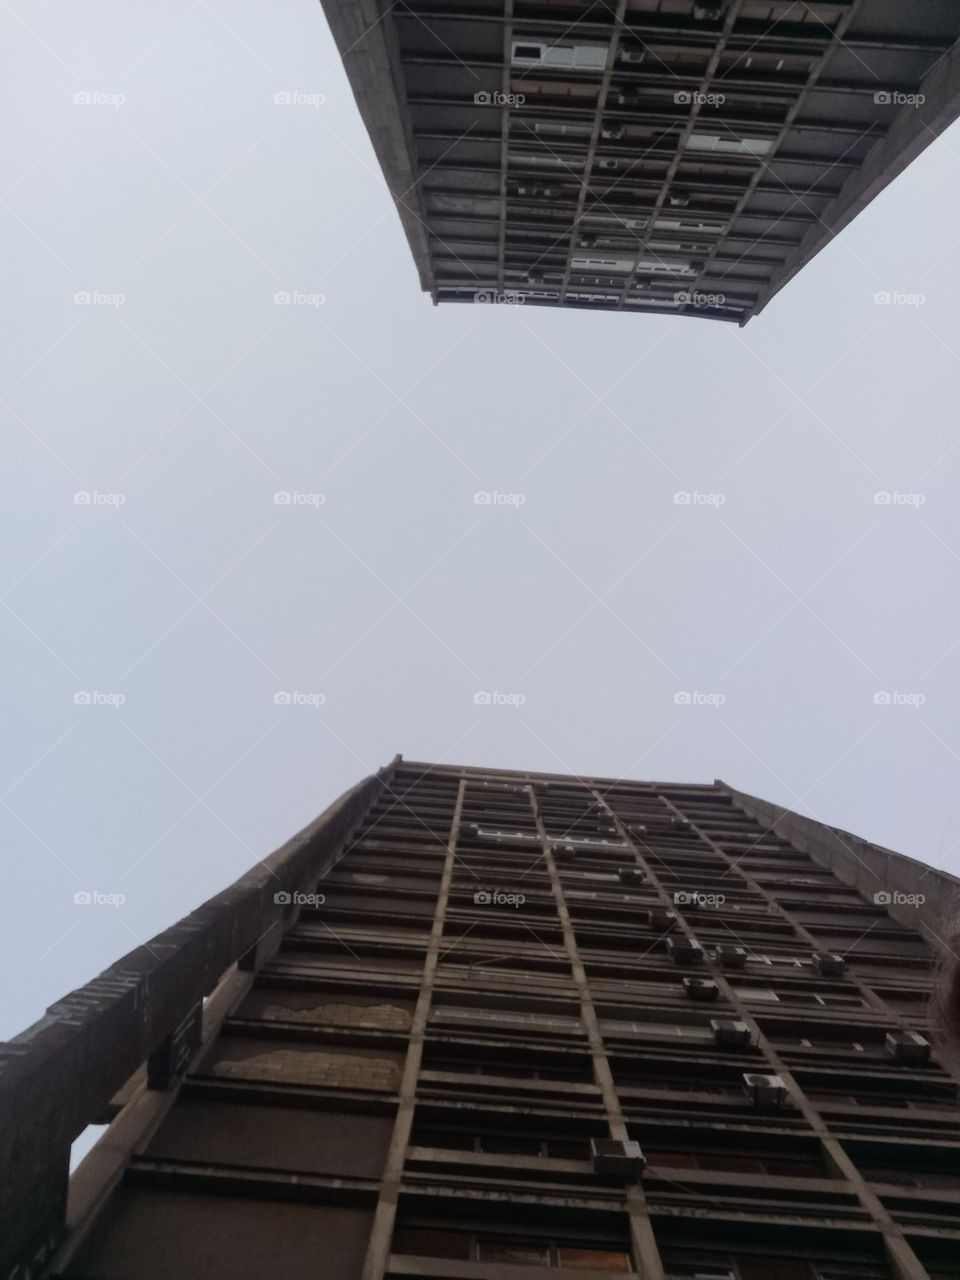 a skyscrapers that are penetrating into the clouds